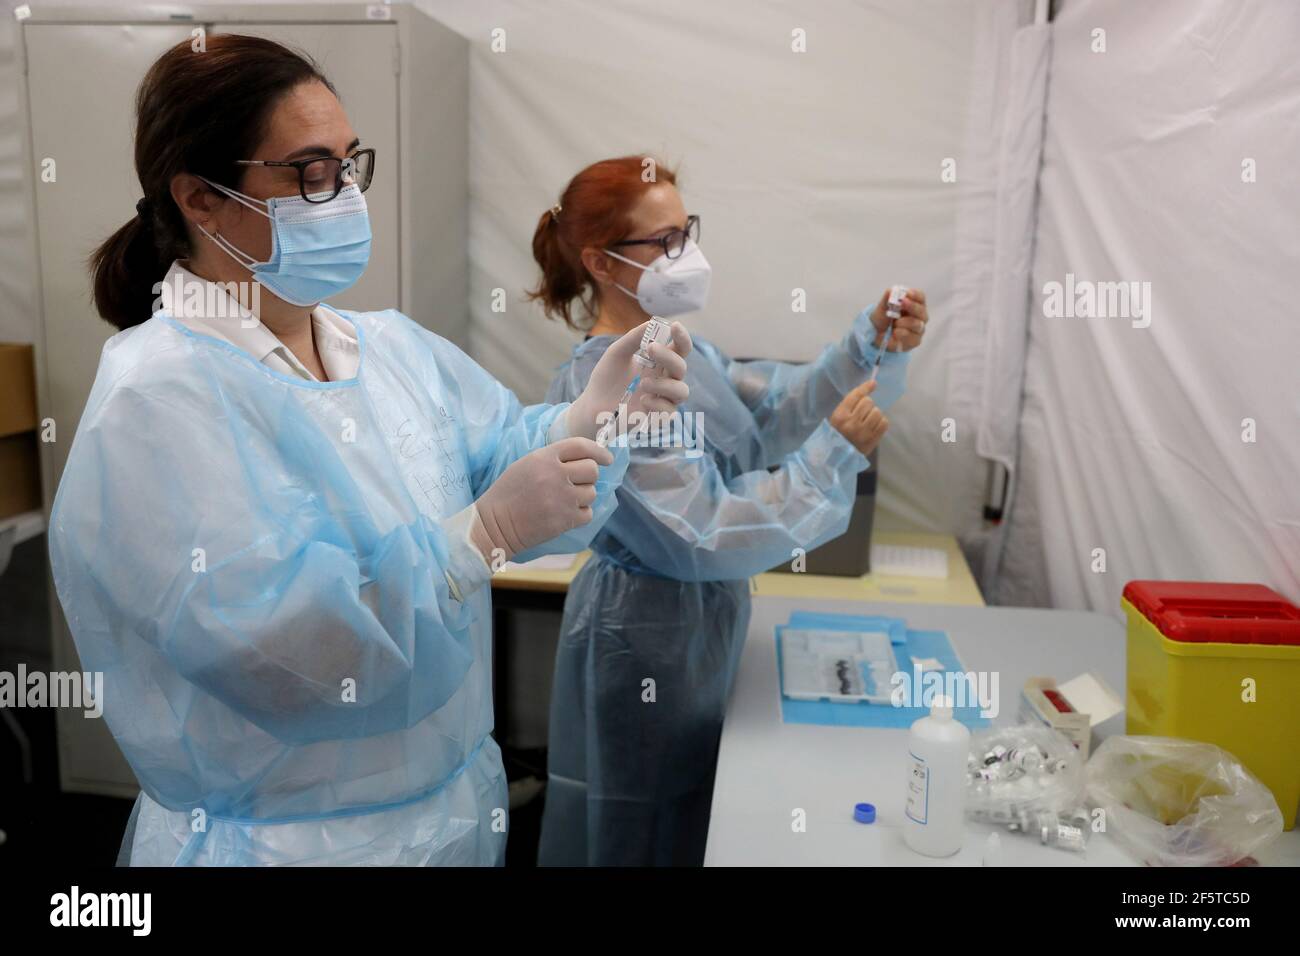 Lisbon, Portugal. 27th Mar, 2021. Medical workers fill up syringes with the AstraZeneca COVID-19 vaccine in Lisbon, Portugal, March 27, 2021. Portugal on Saturday started vaccinations of some 78,700 teachers and workers from pre-schools and schools of the first four years of the nine-year basic education. They are listed as one of the priority groups for the resumption of classes. Credit: Pedro Fiuza/Xinhua/Alamy Live News Stock Photo